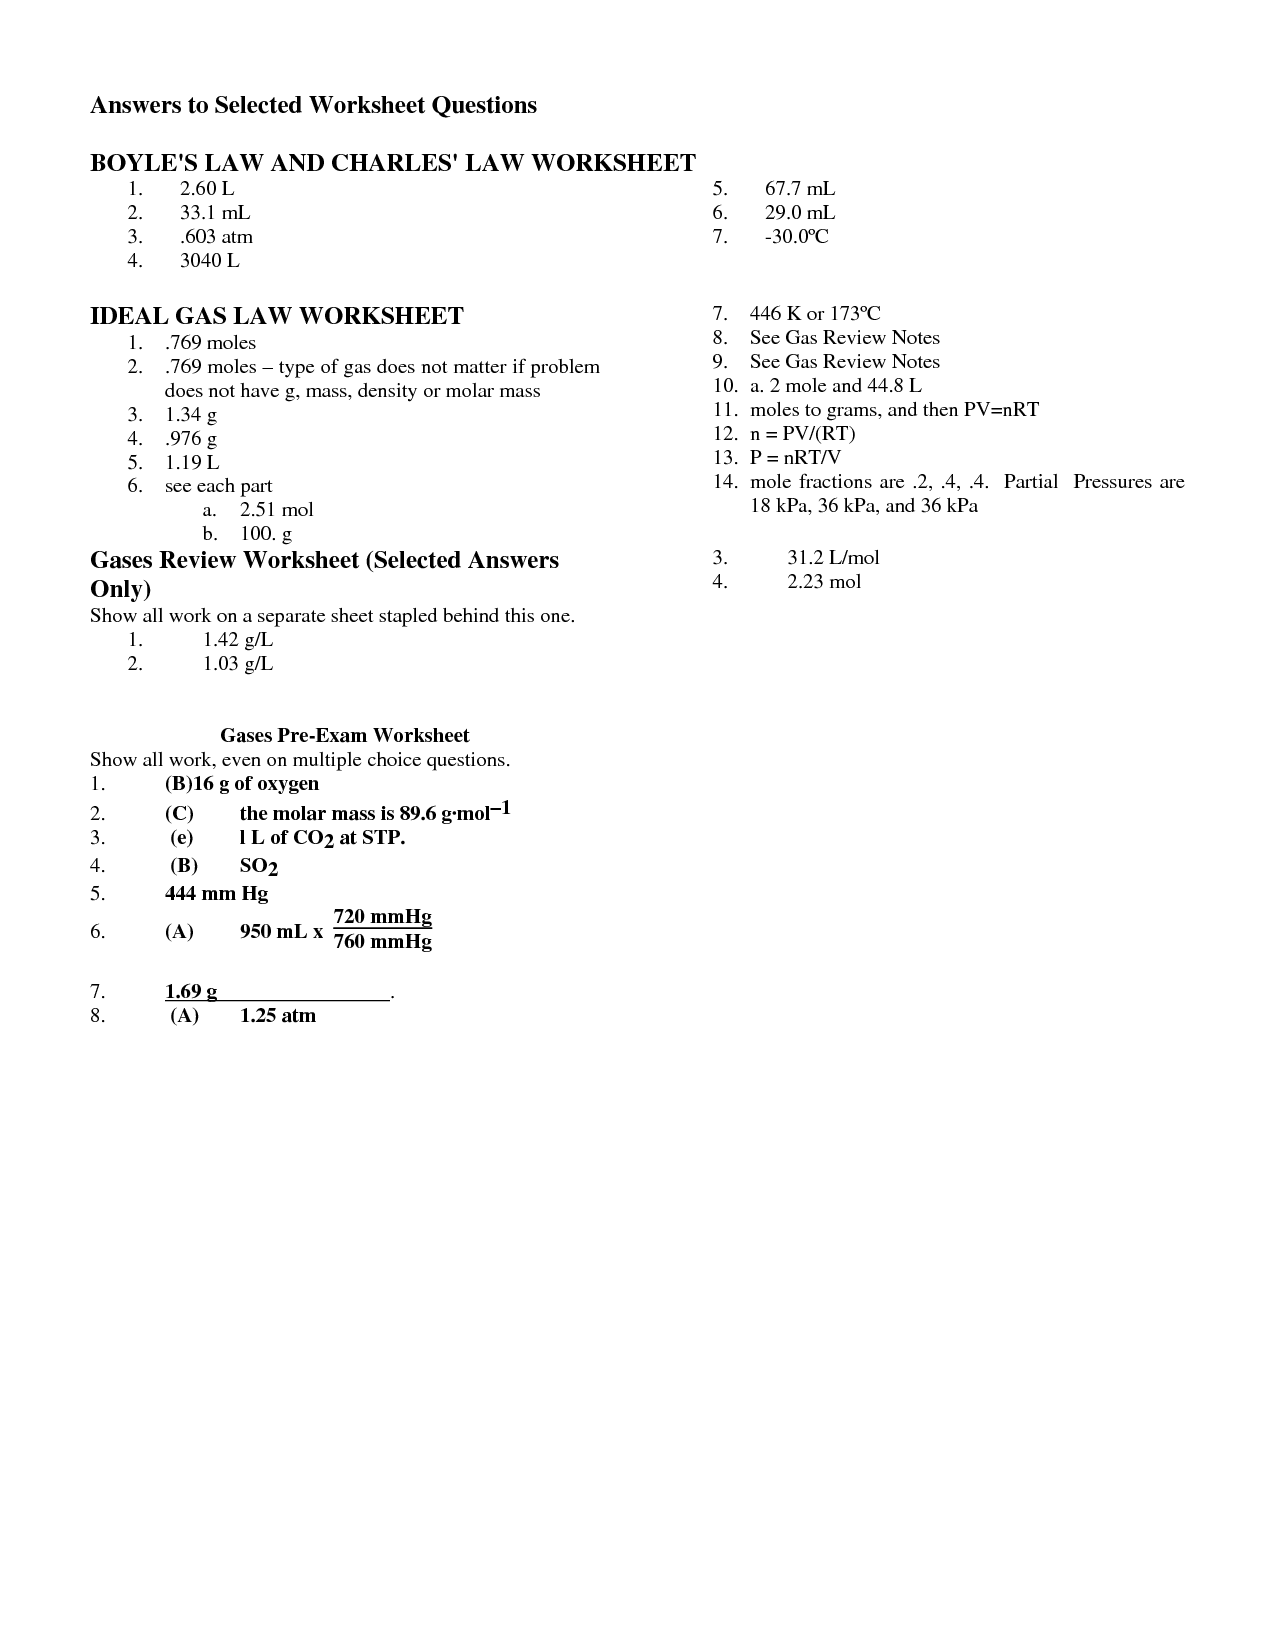 Charles and Boyles Law Worksheet Answers Image